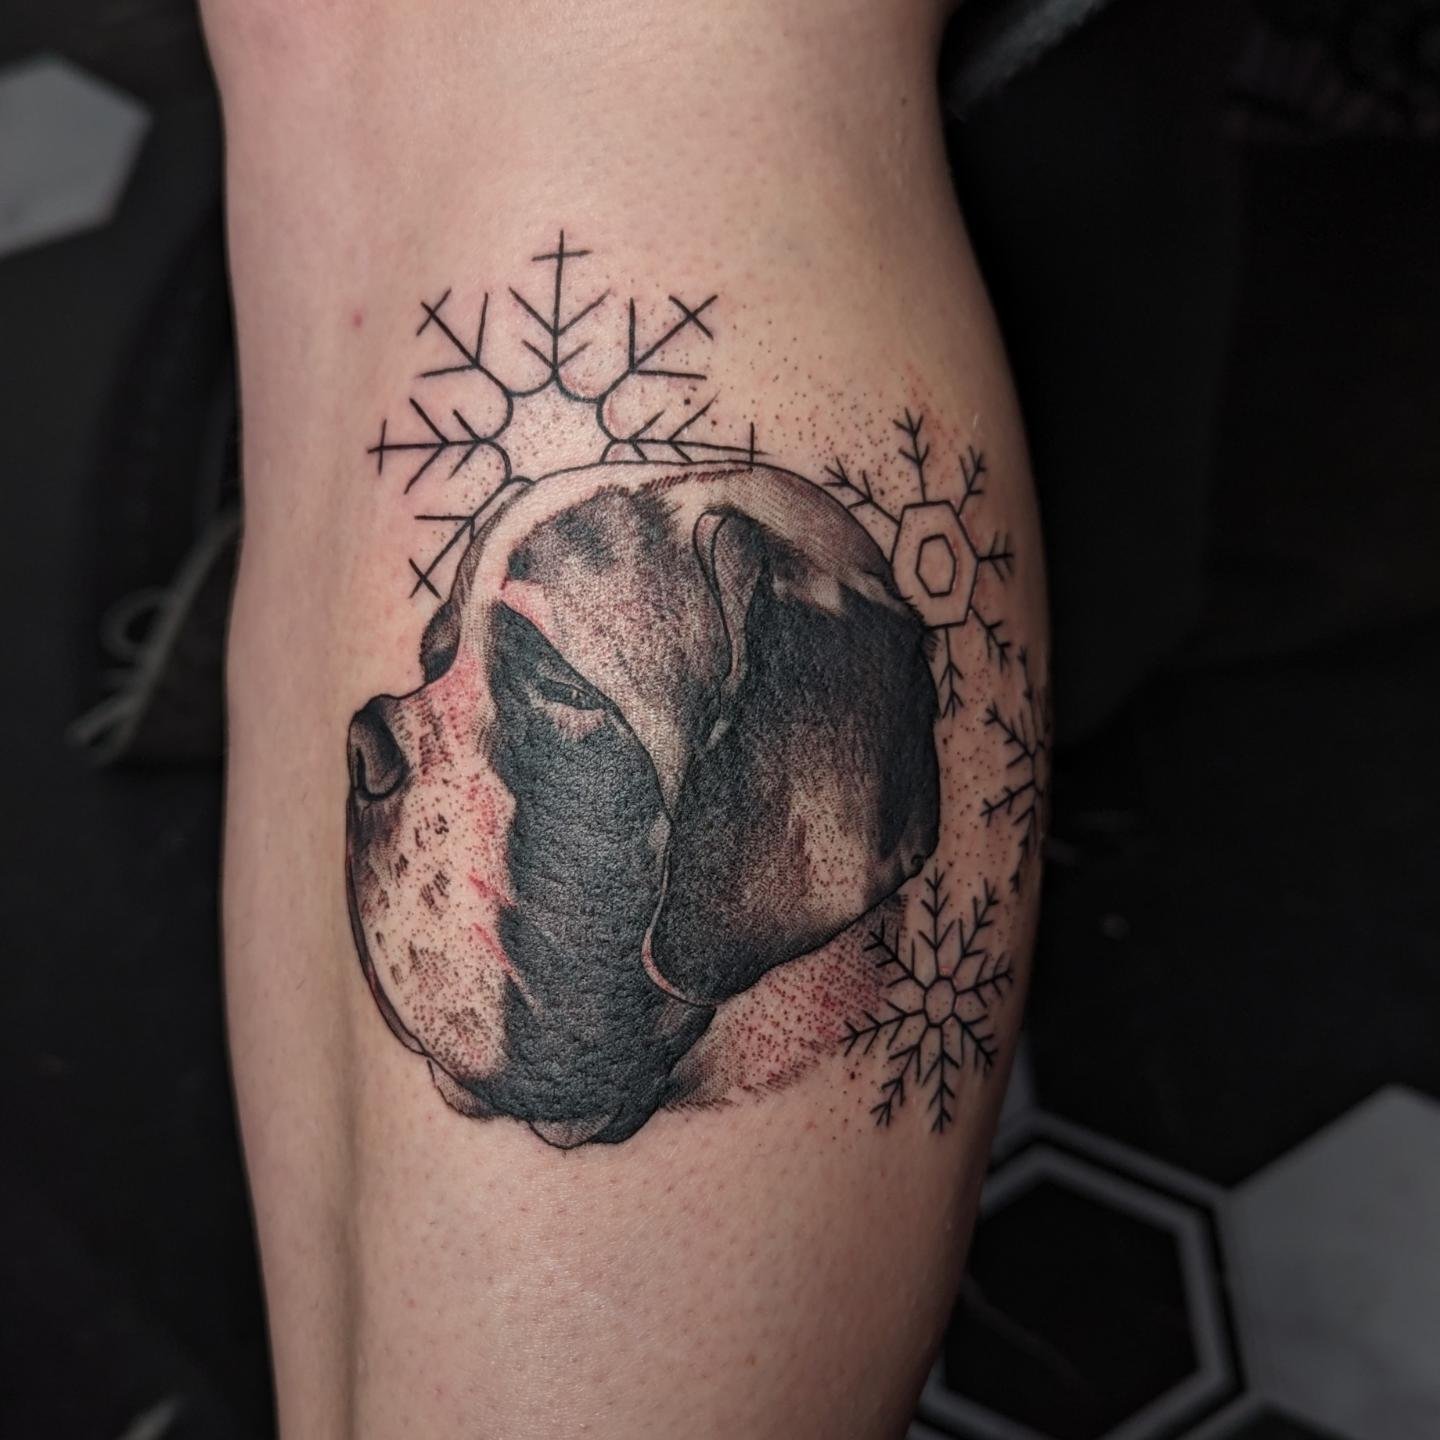 lil St Bernard. more to be added later 🤙 @pepax.official @radiantcolorsink @allegoryink @ttechofficial @masttattoo.official @dragonhawkofficial @biotat_ @tattooproton @mapletattoosupply @eikondevice @rotaryworks